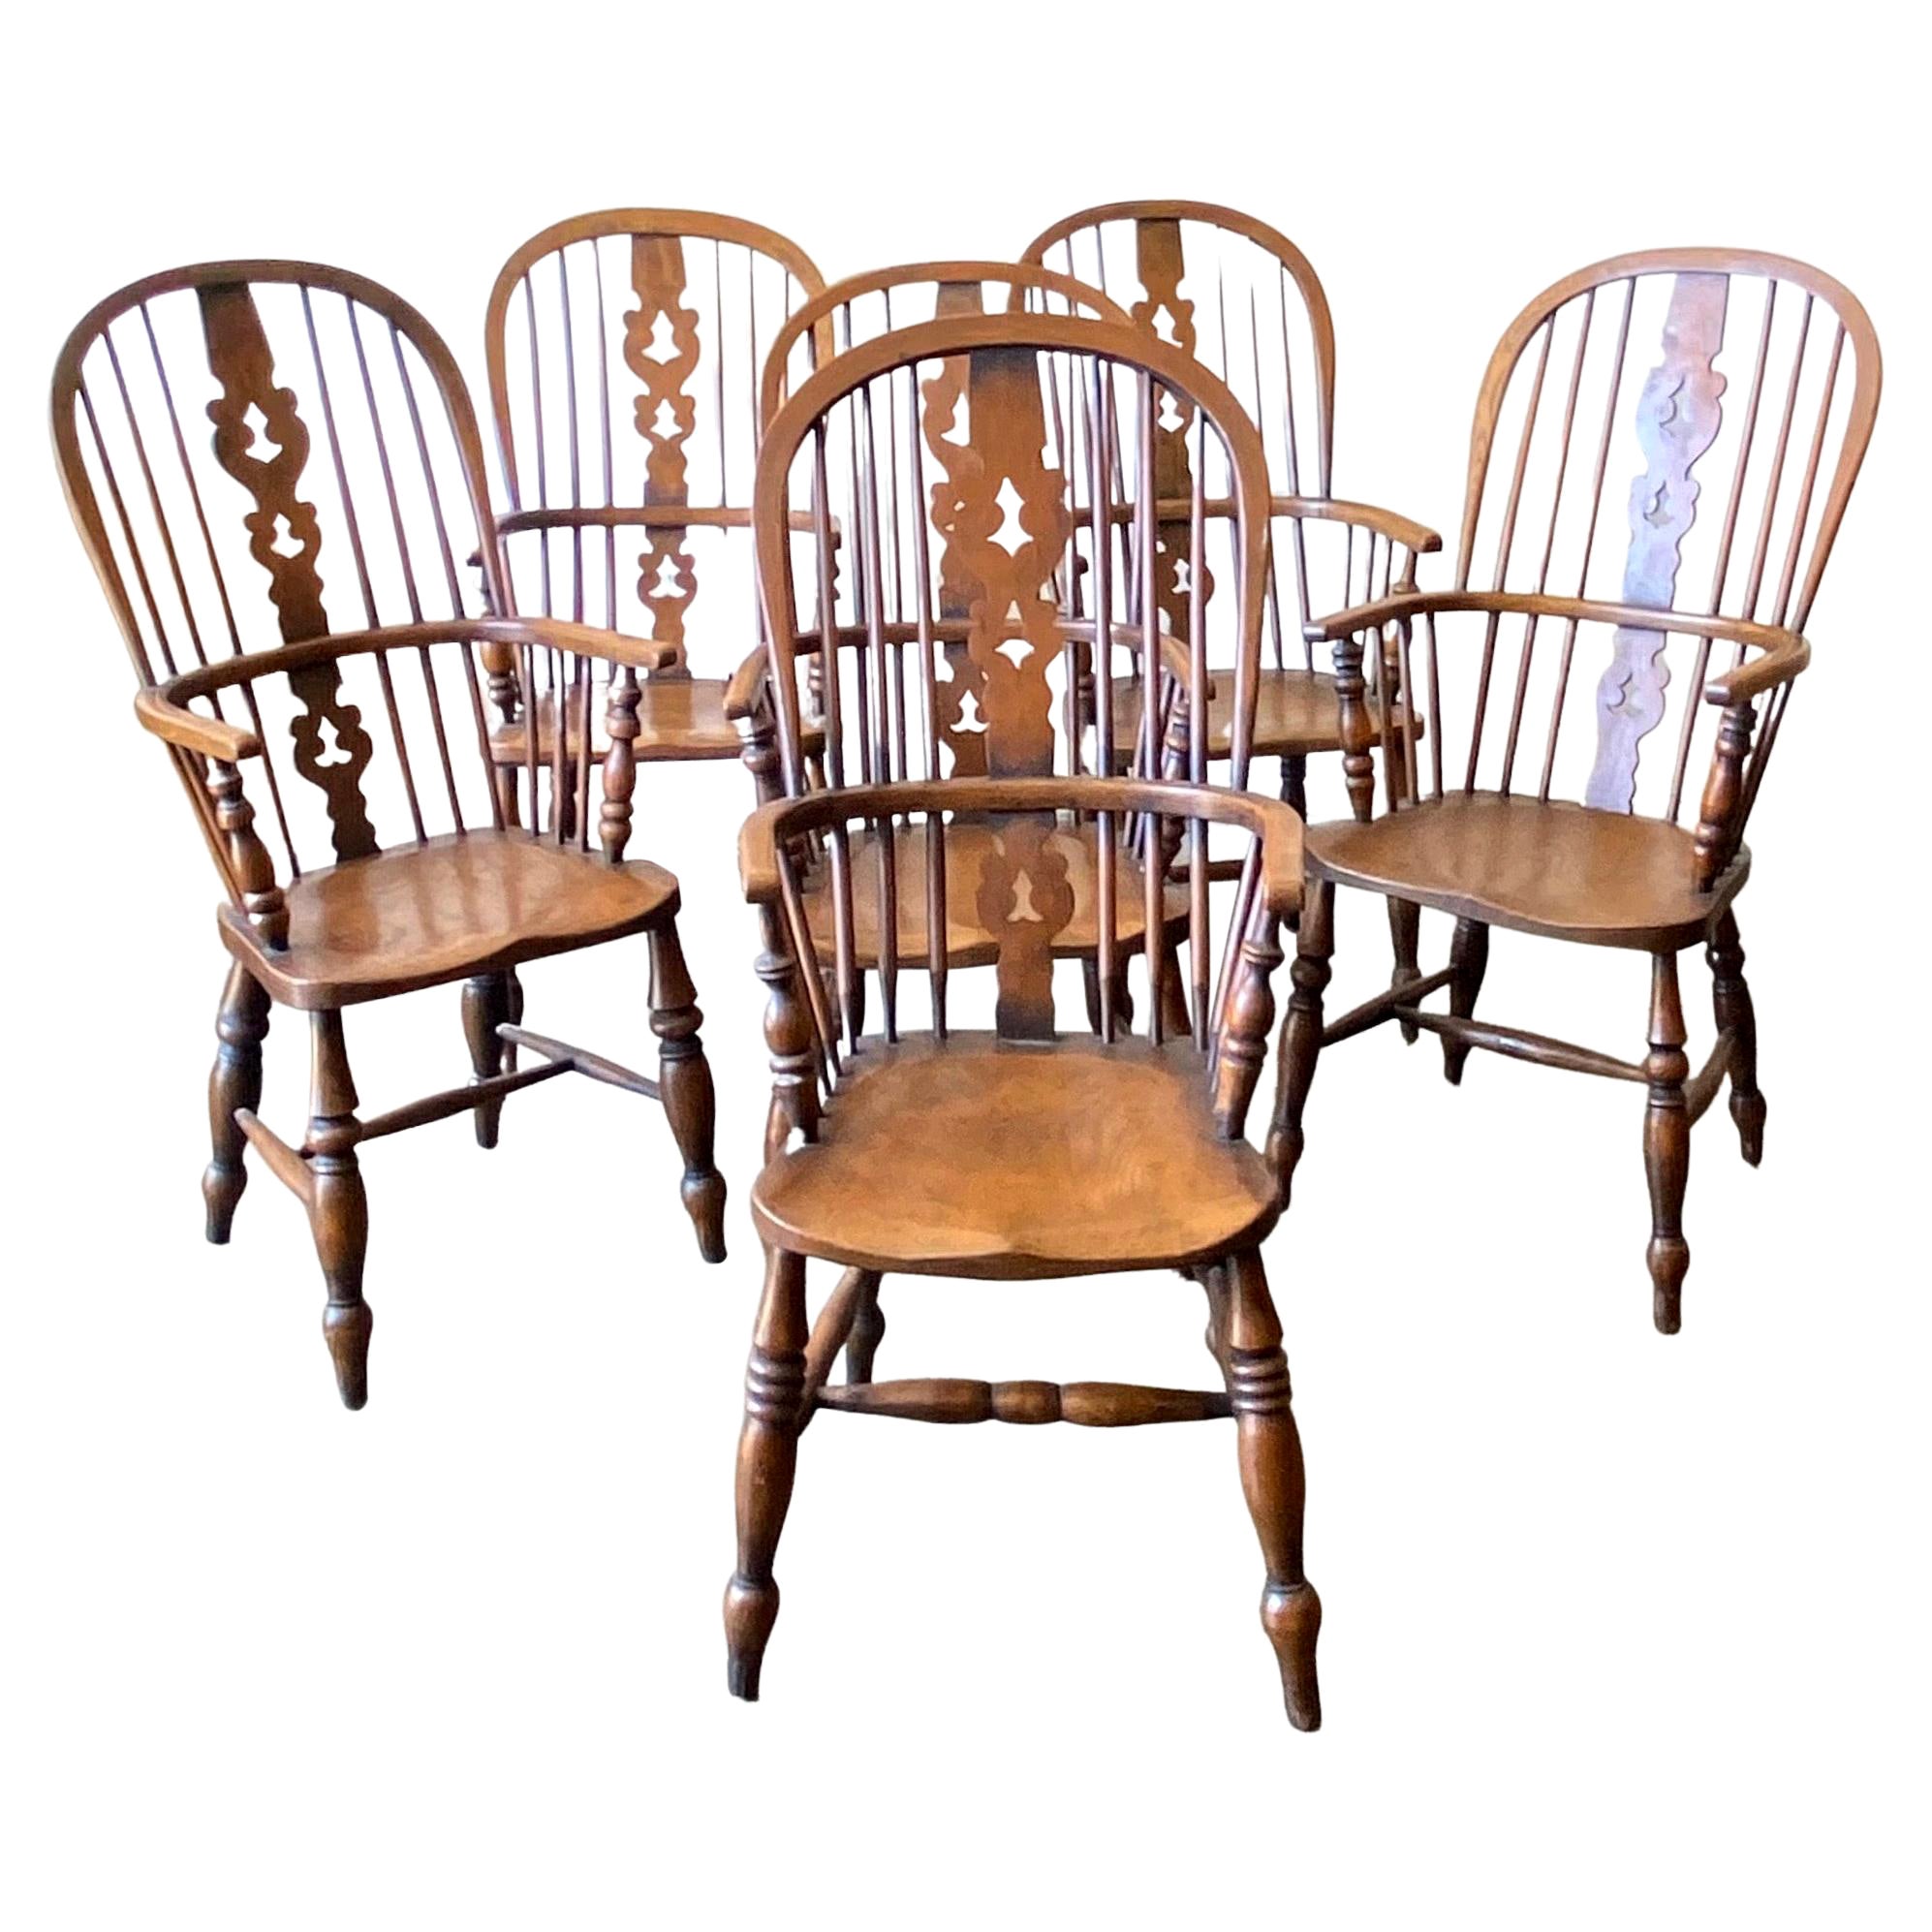 19th Century English Oak and Yew Wood Windsor Style Dining Chairs, Set of Six